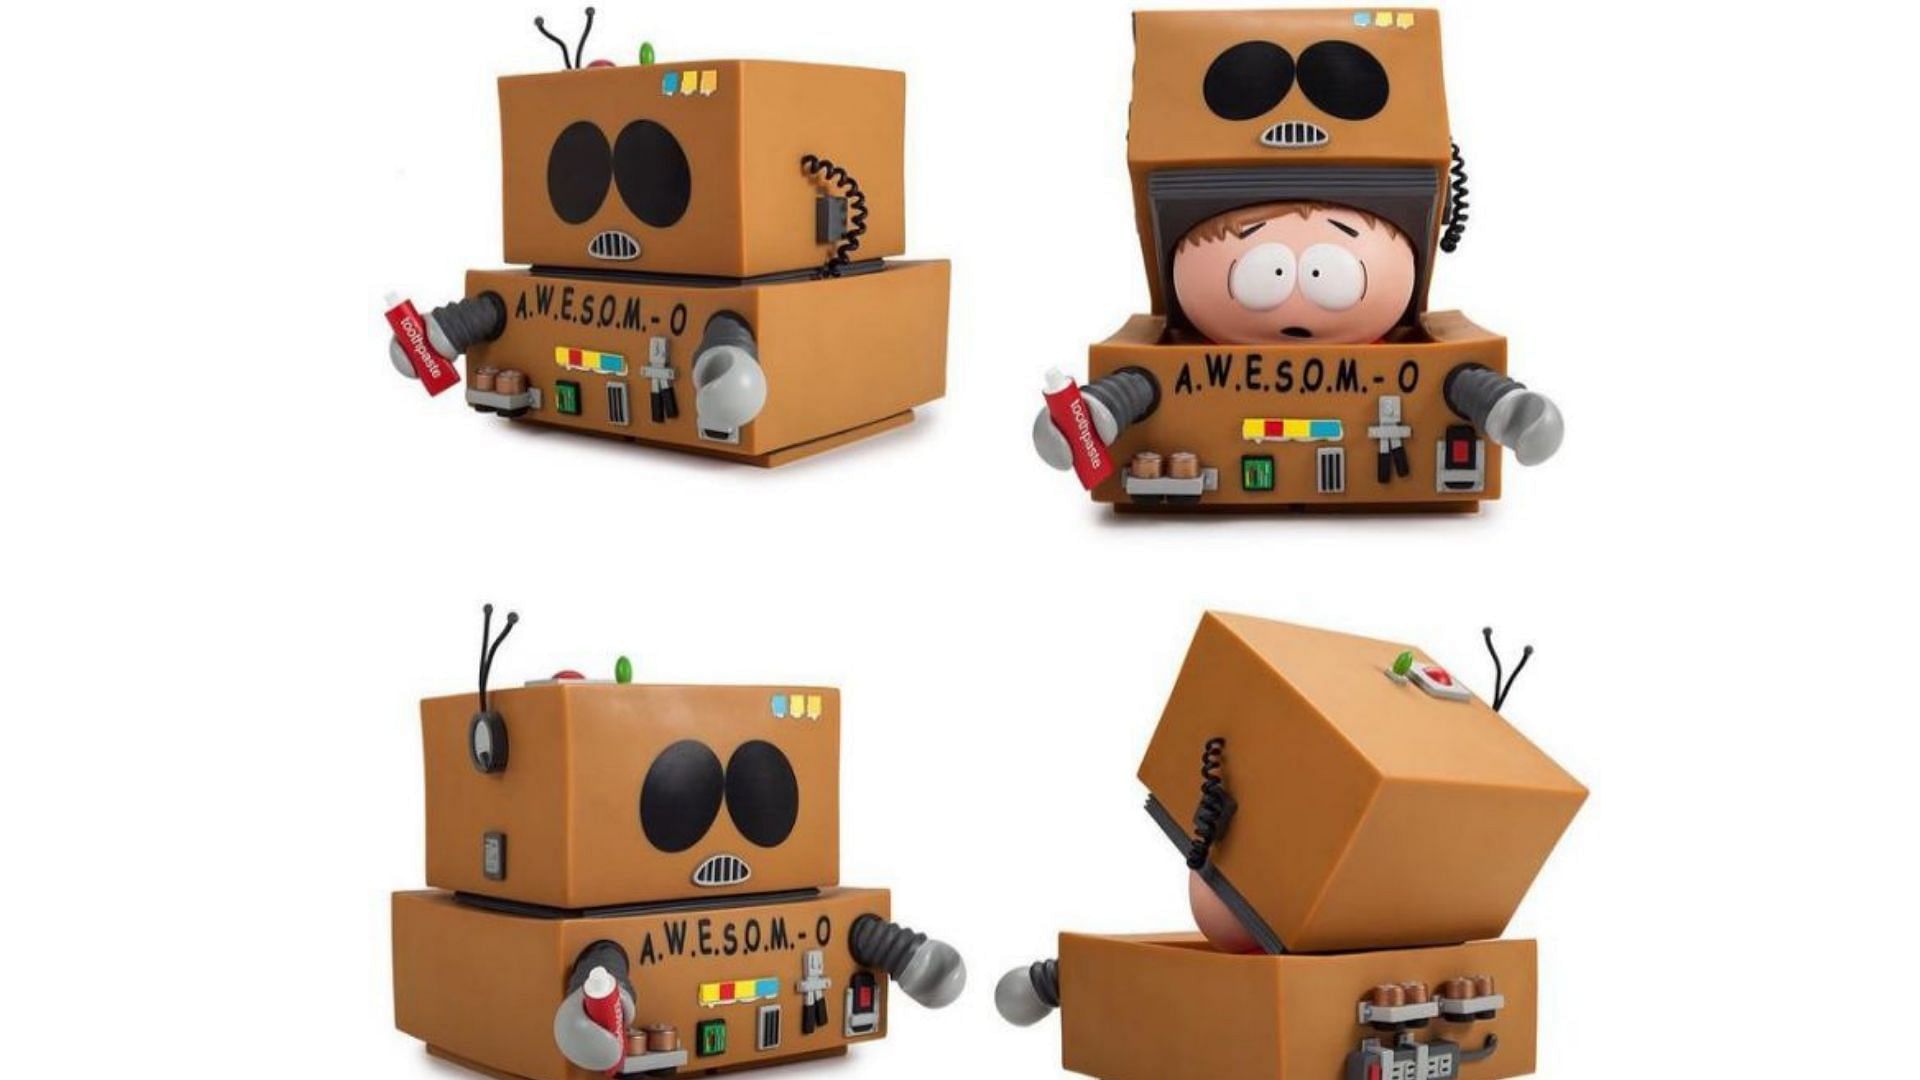 The forthcoming sneakers are inspired by AWESOM-O robot of South Park (Image via Instagram/woowzanet)